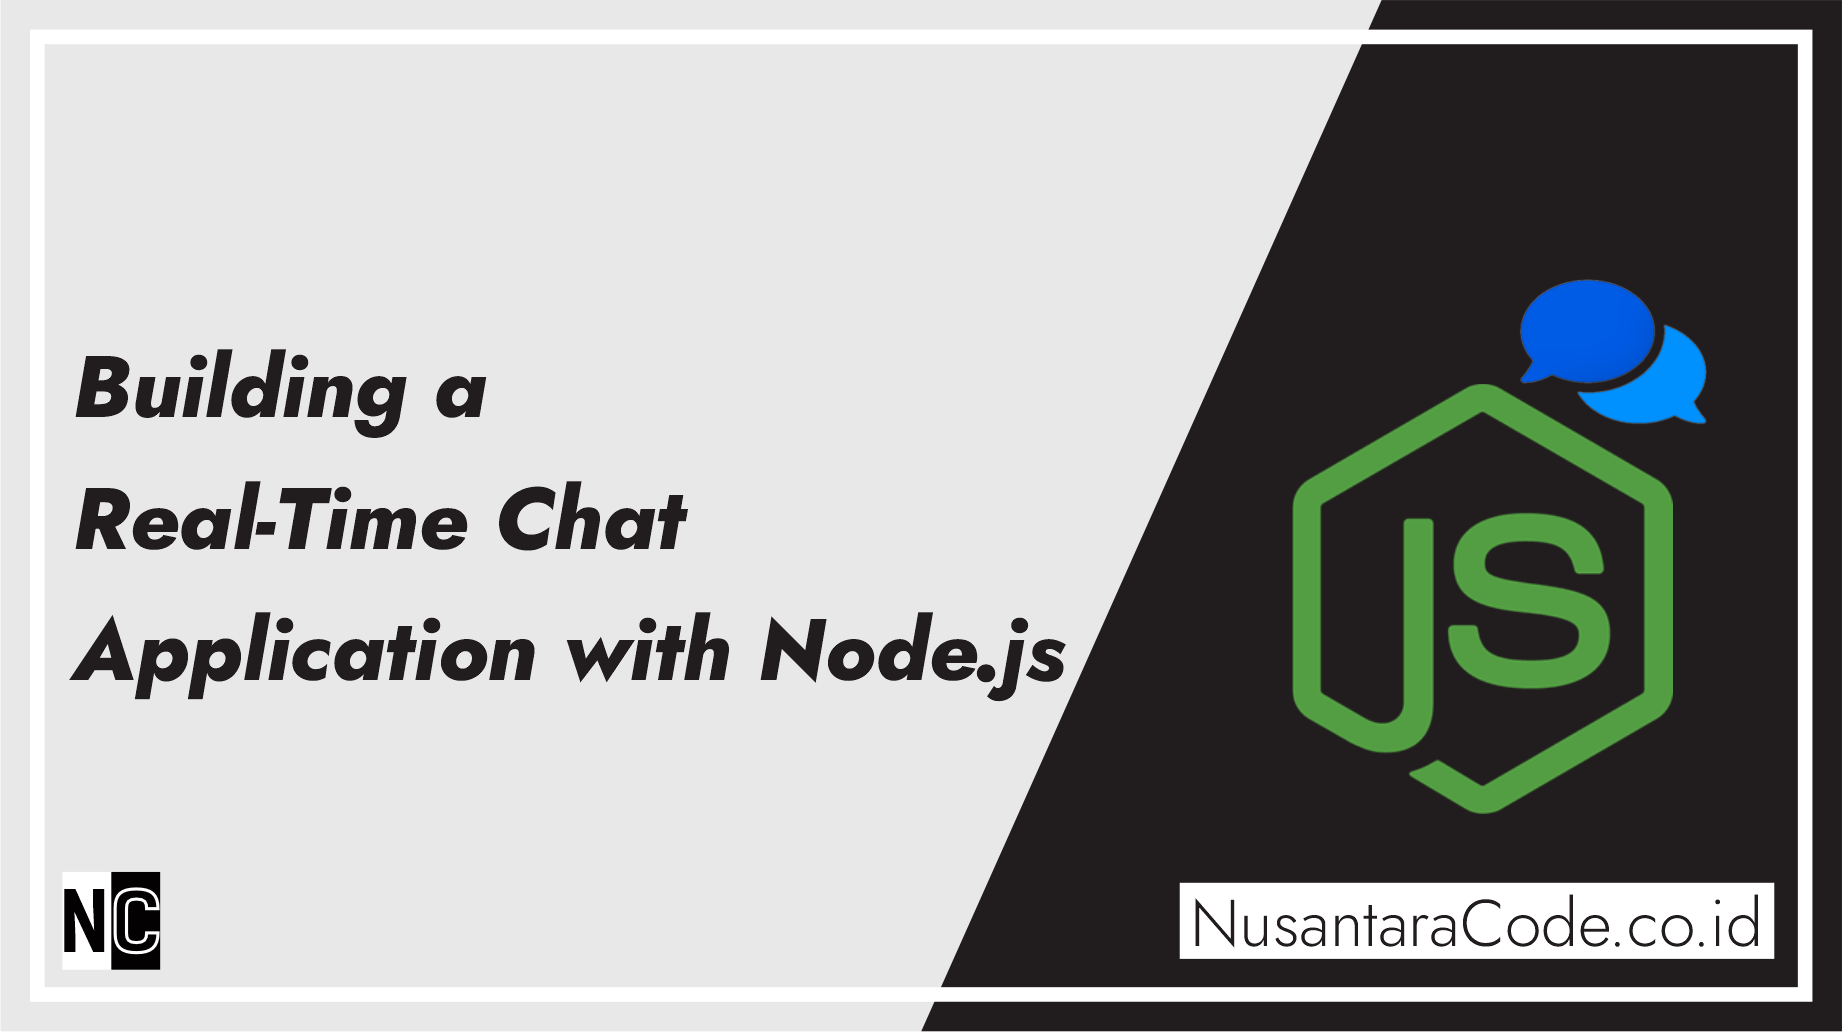 Building a Real-Time Chat Application with Node.js